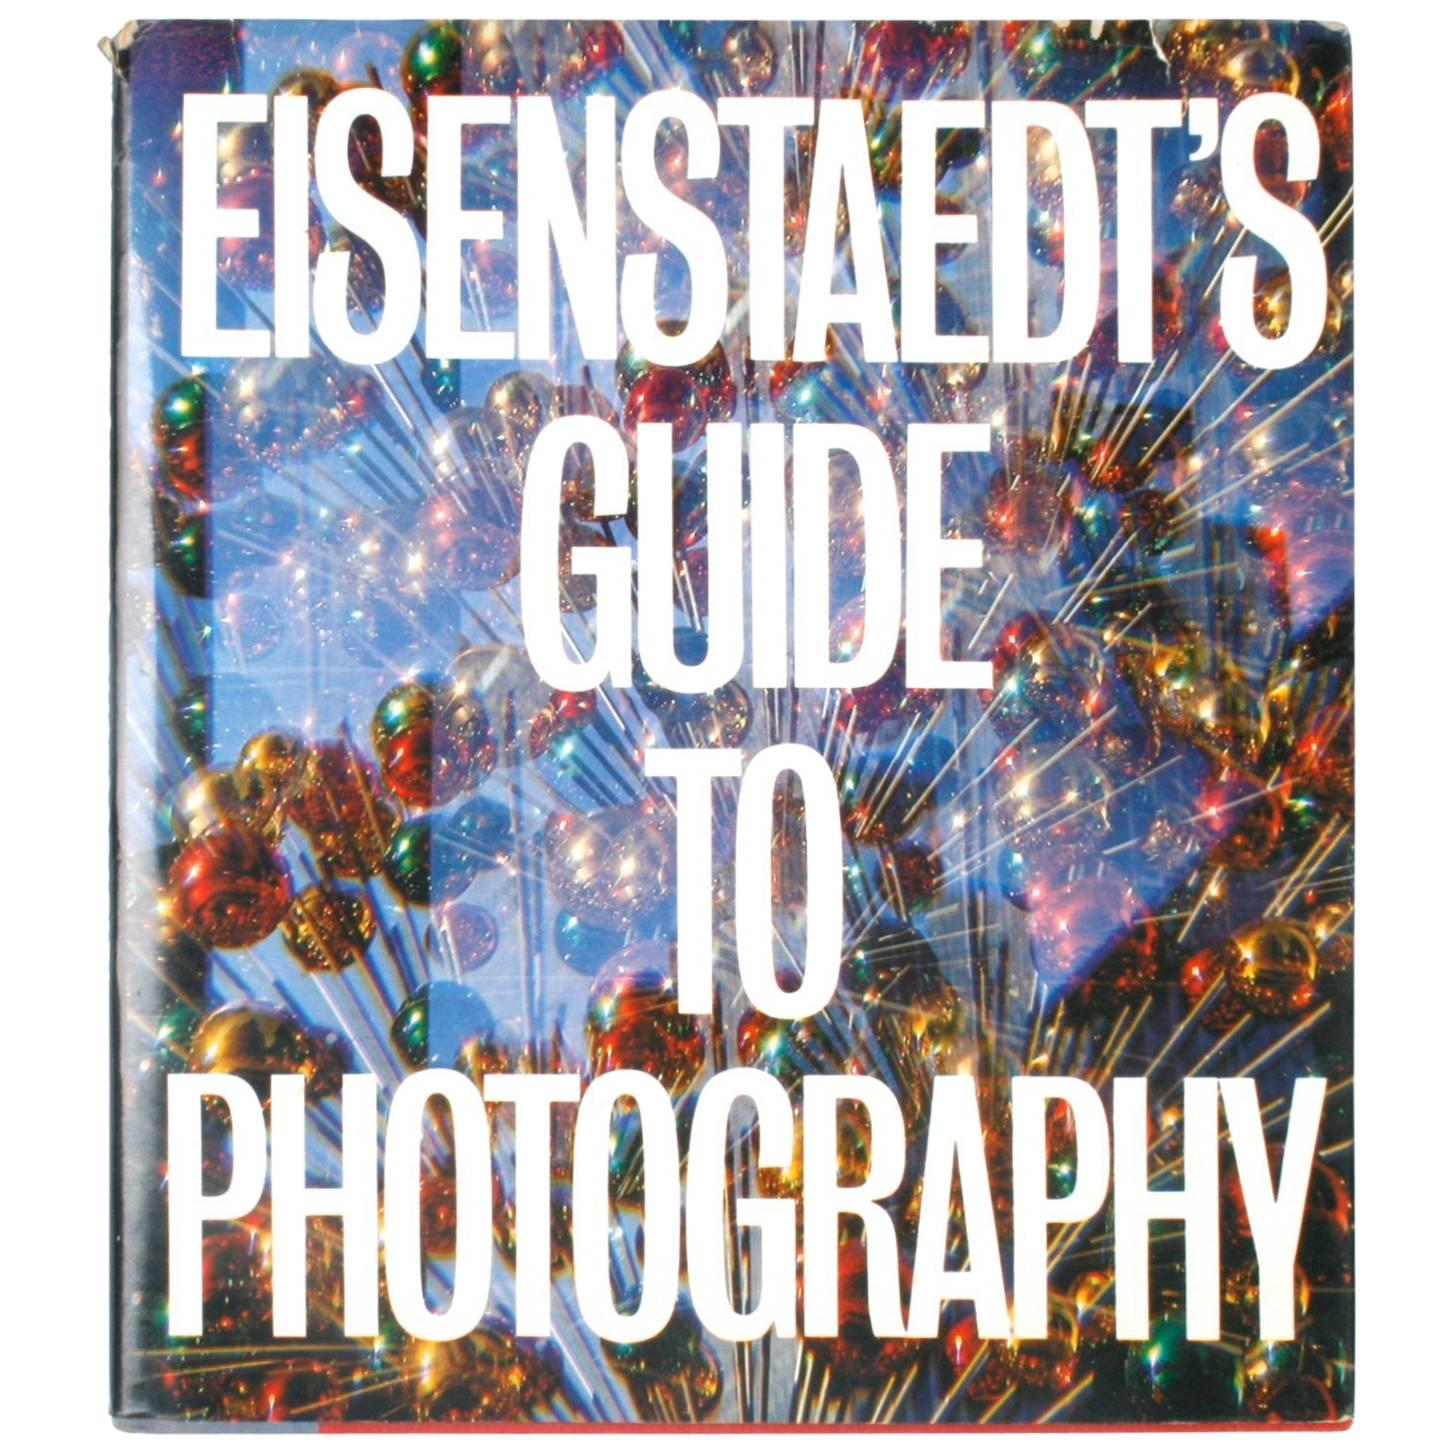 Eisenstaedt's Guide to Photography by Alfred Eisenstaedt